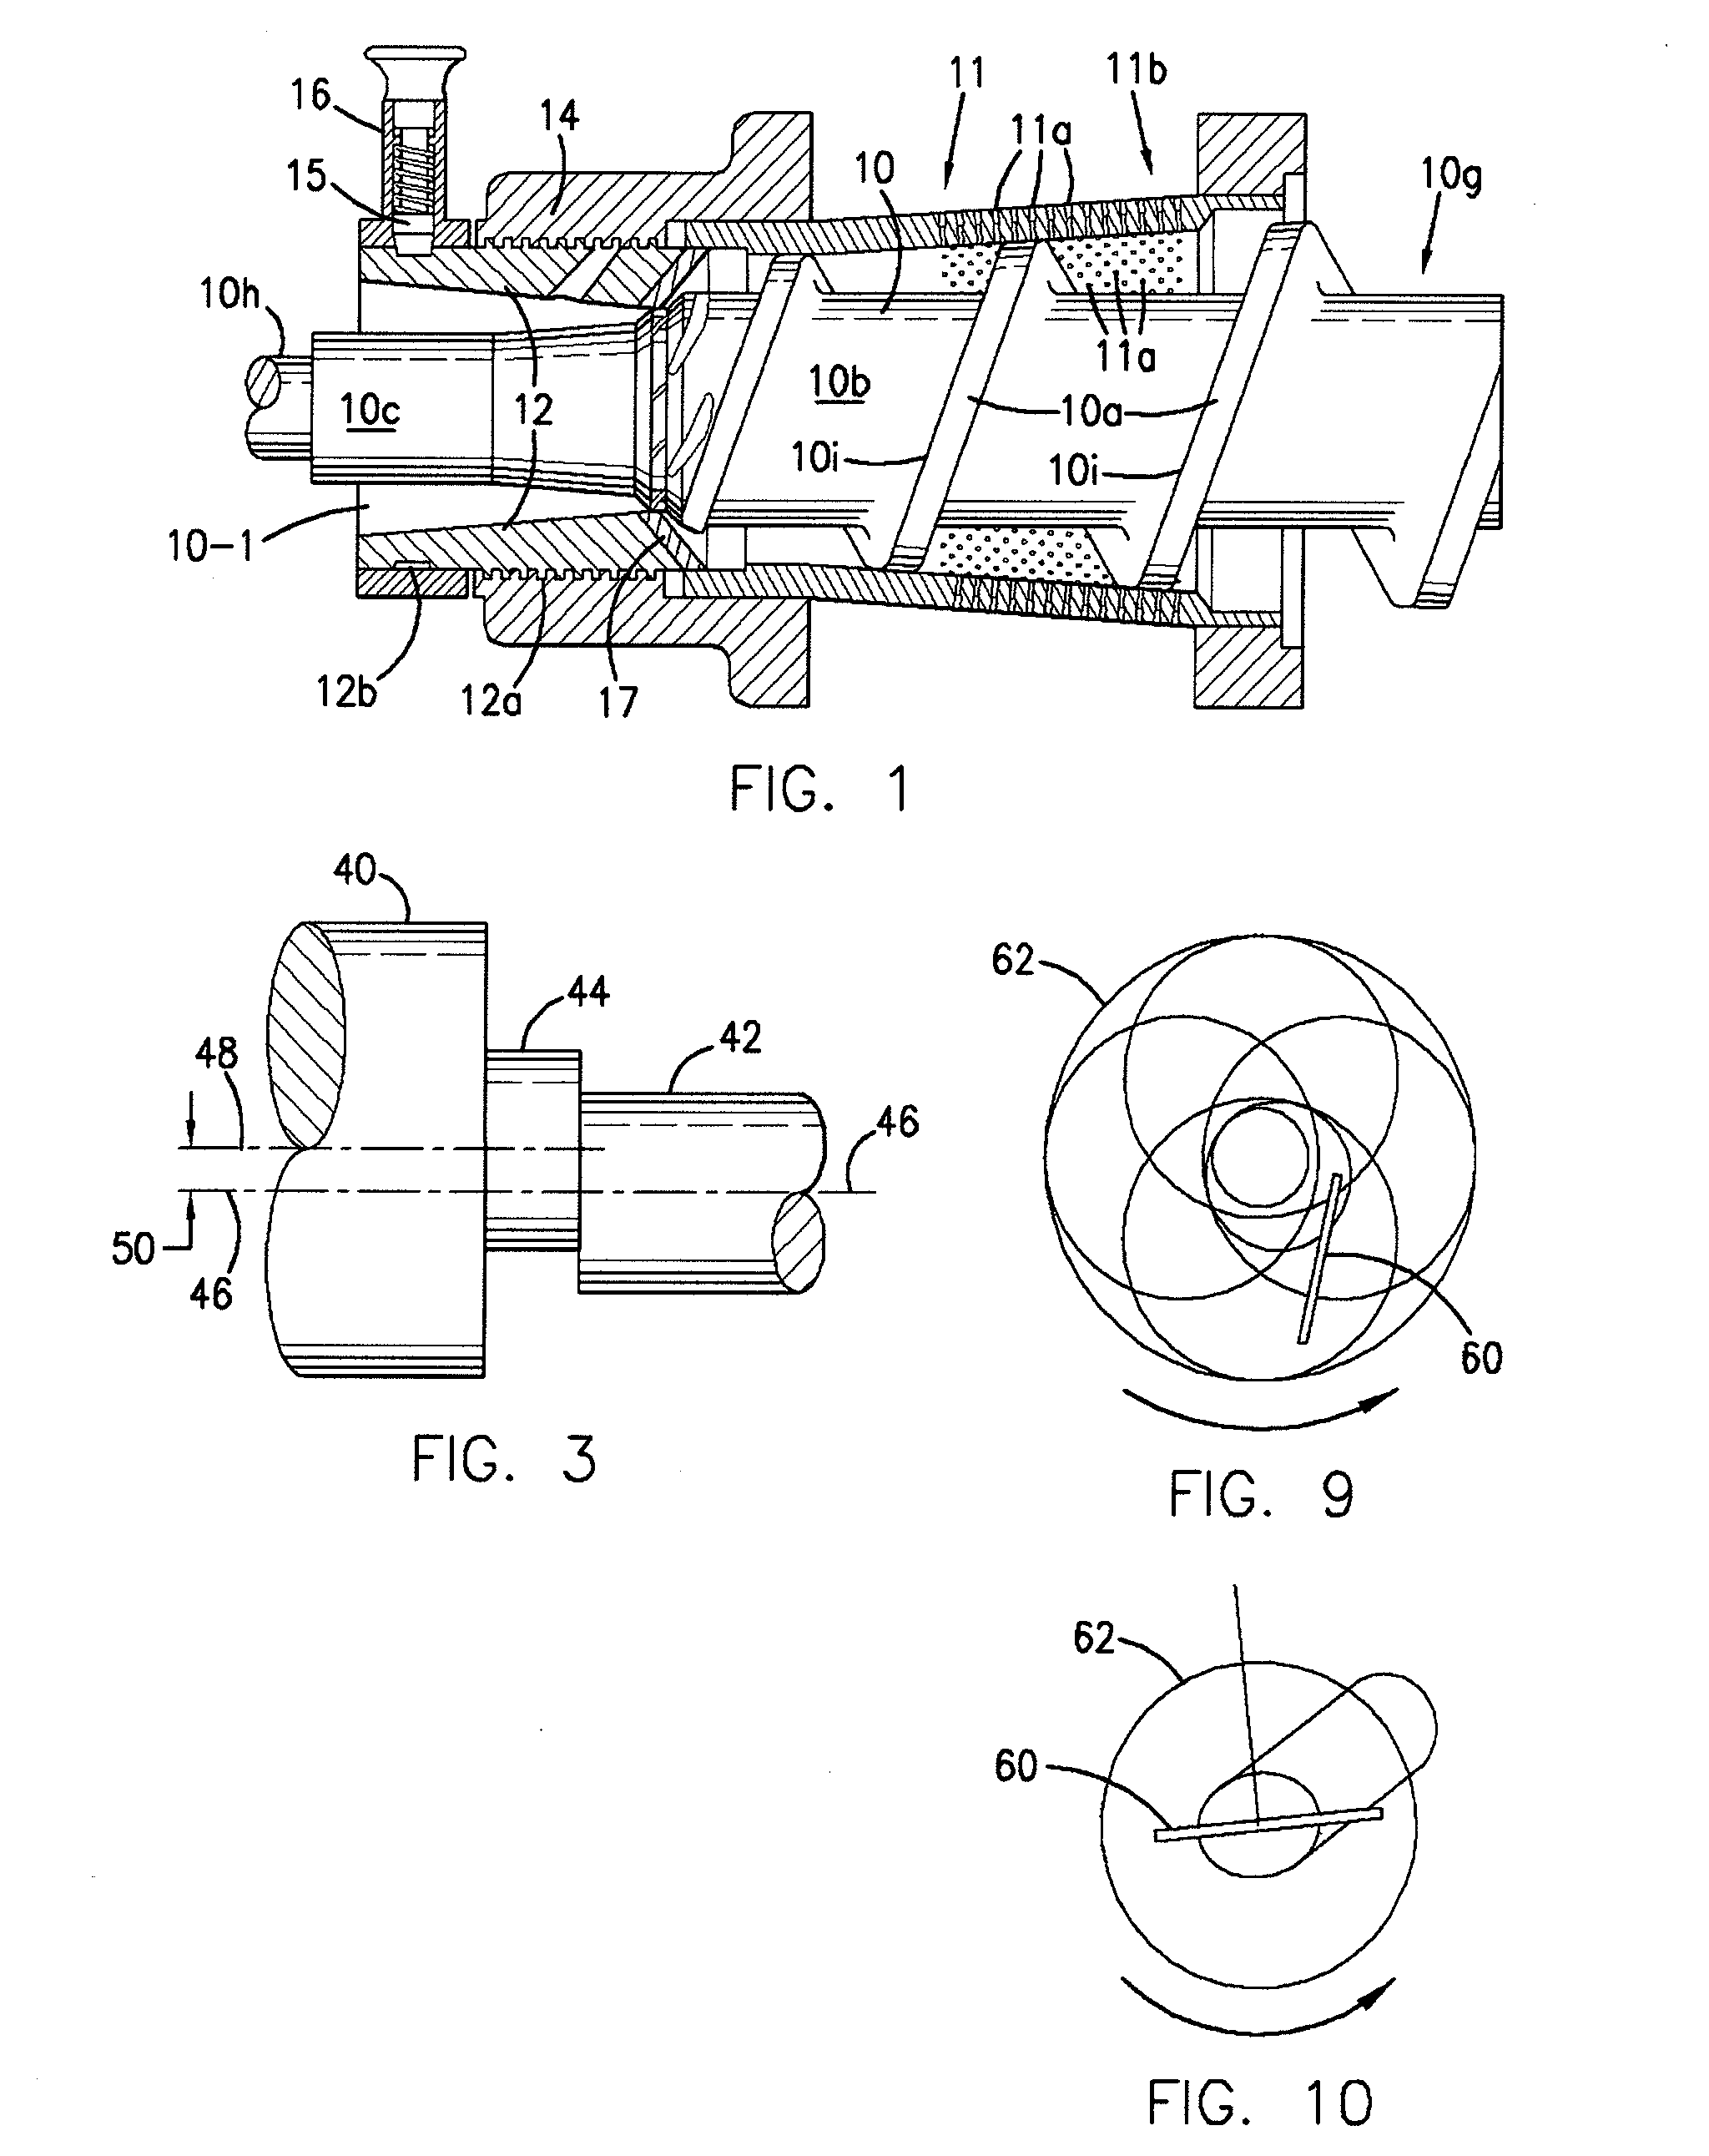 Apparatus and Method for Adjusting Clearance between a Screw and Screen in a Machine for Separating Composite Materials